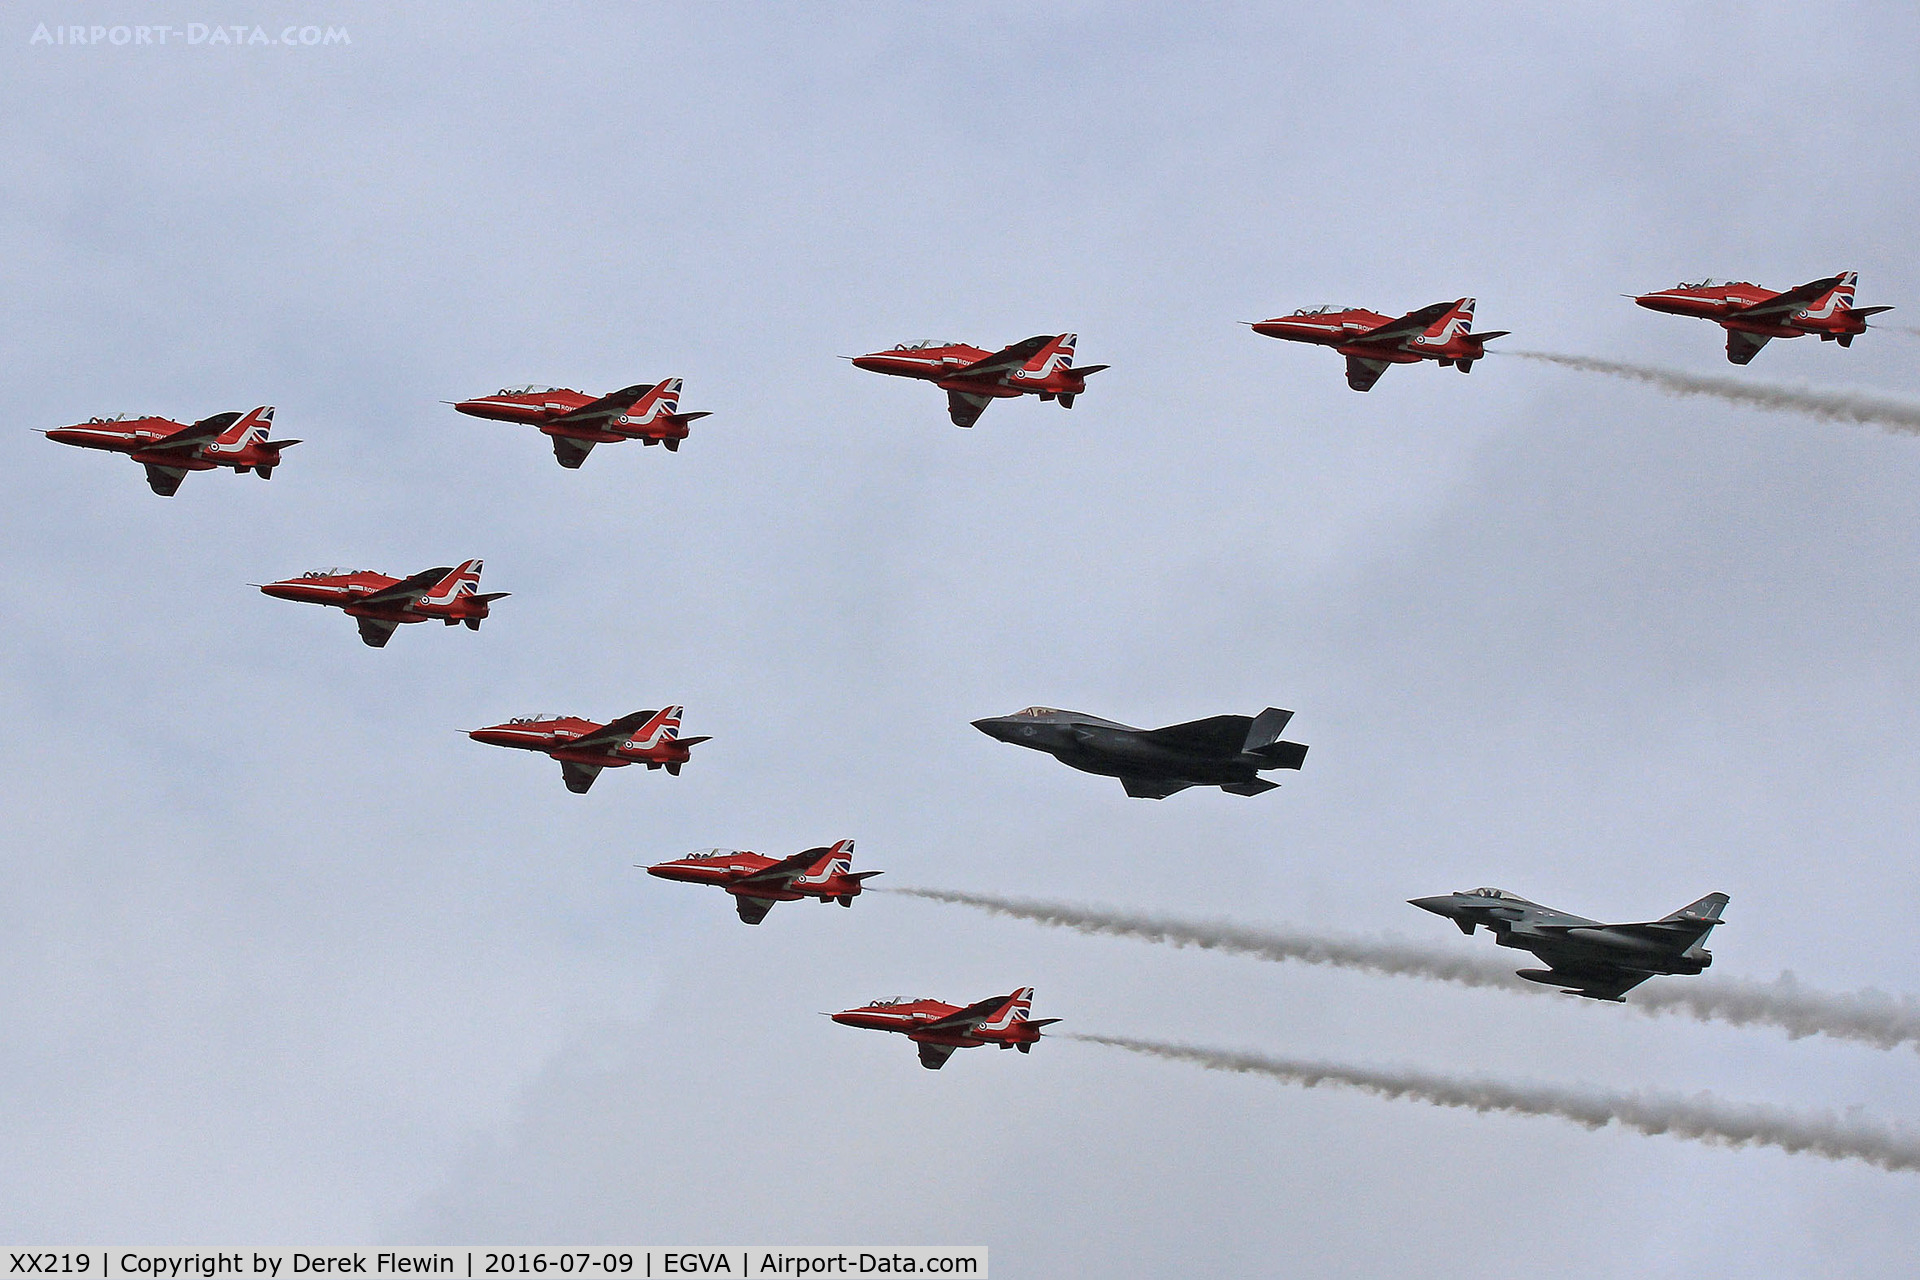 XX219, 1978 Hawker Siddeley Hawk T.1A C/N 055/312055, Joint flypast featuring the F-35B, RAF Typhoon and the Red Arrows display team, RIAT 2016.